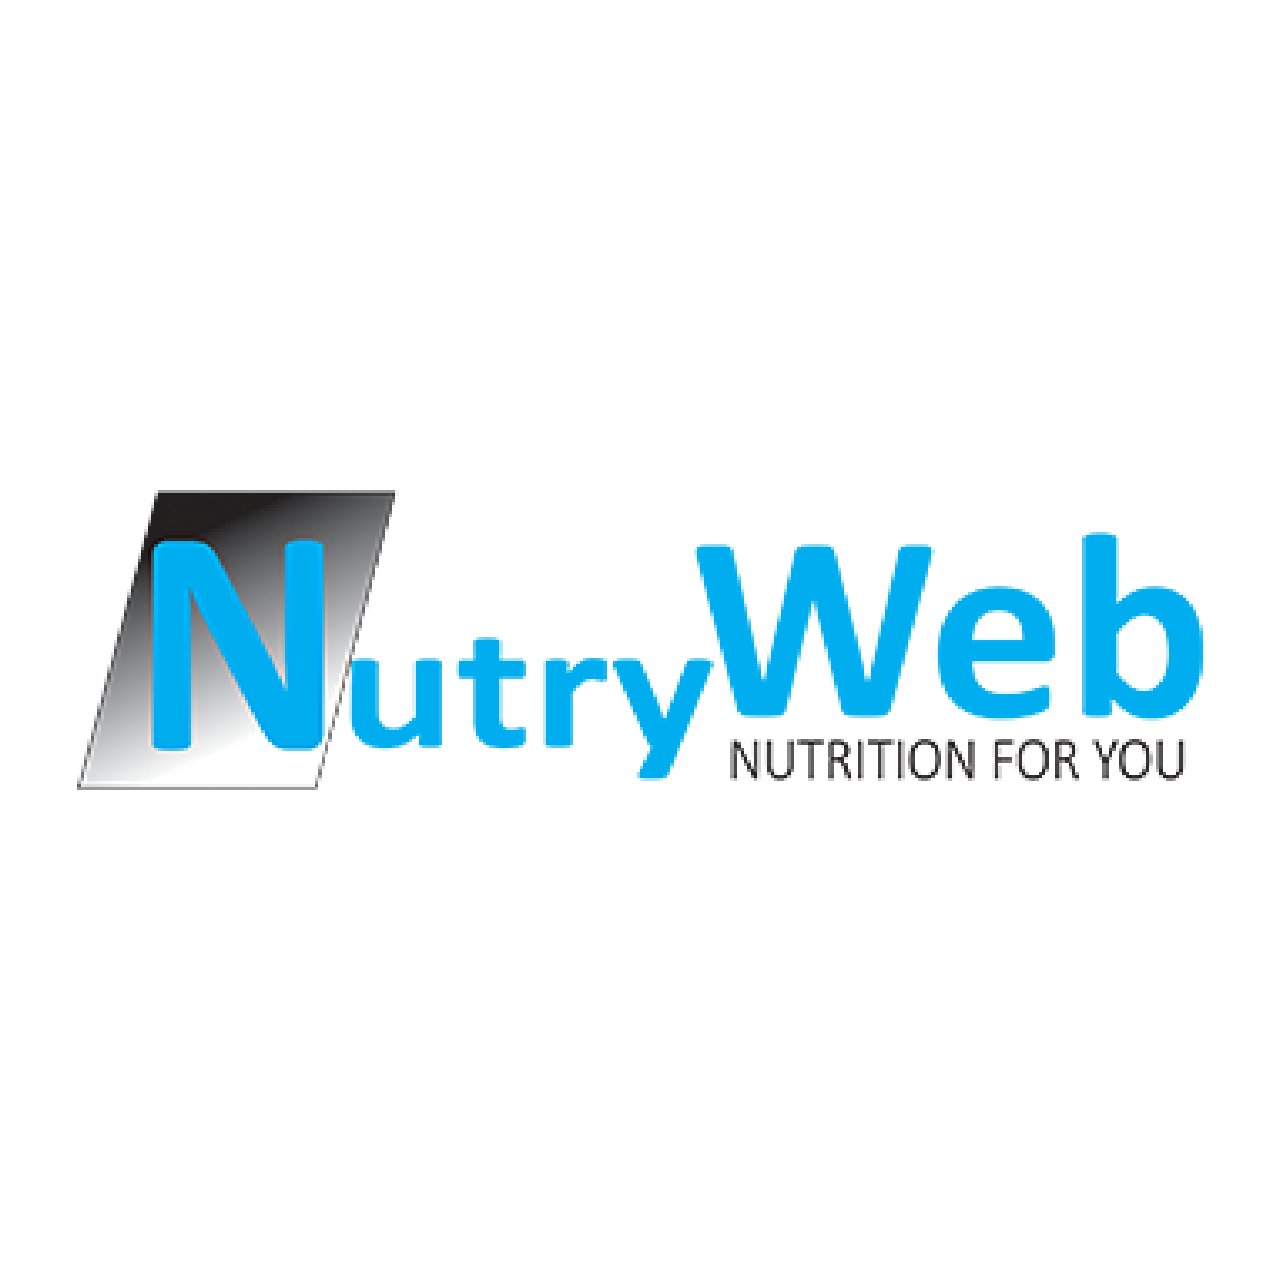 Nutryweb is a company that provides you with news about health problems and different kind of treatments. We are an online e-commerce retail store.